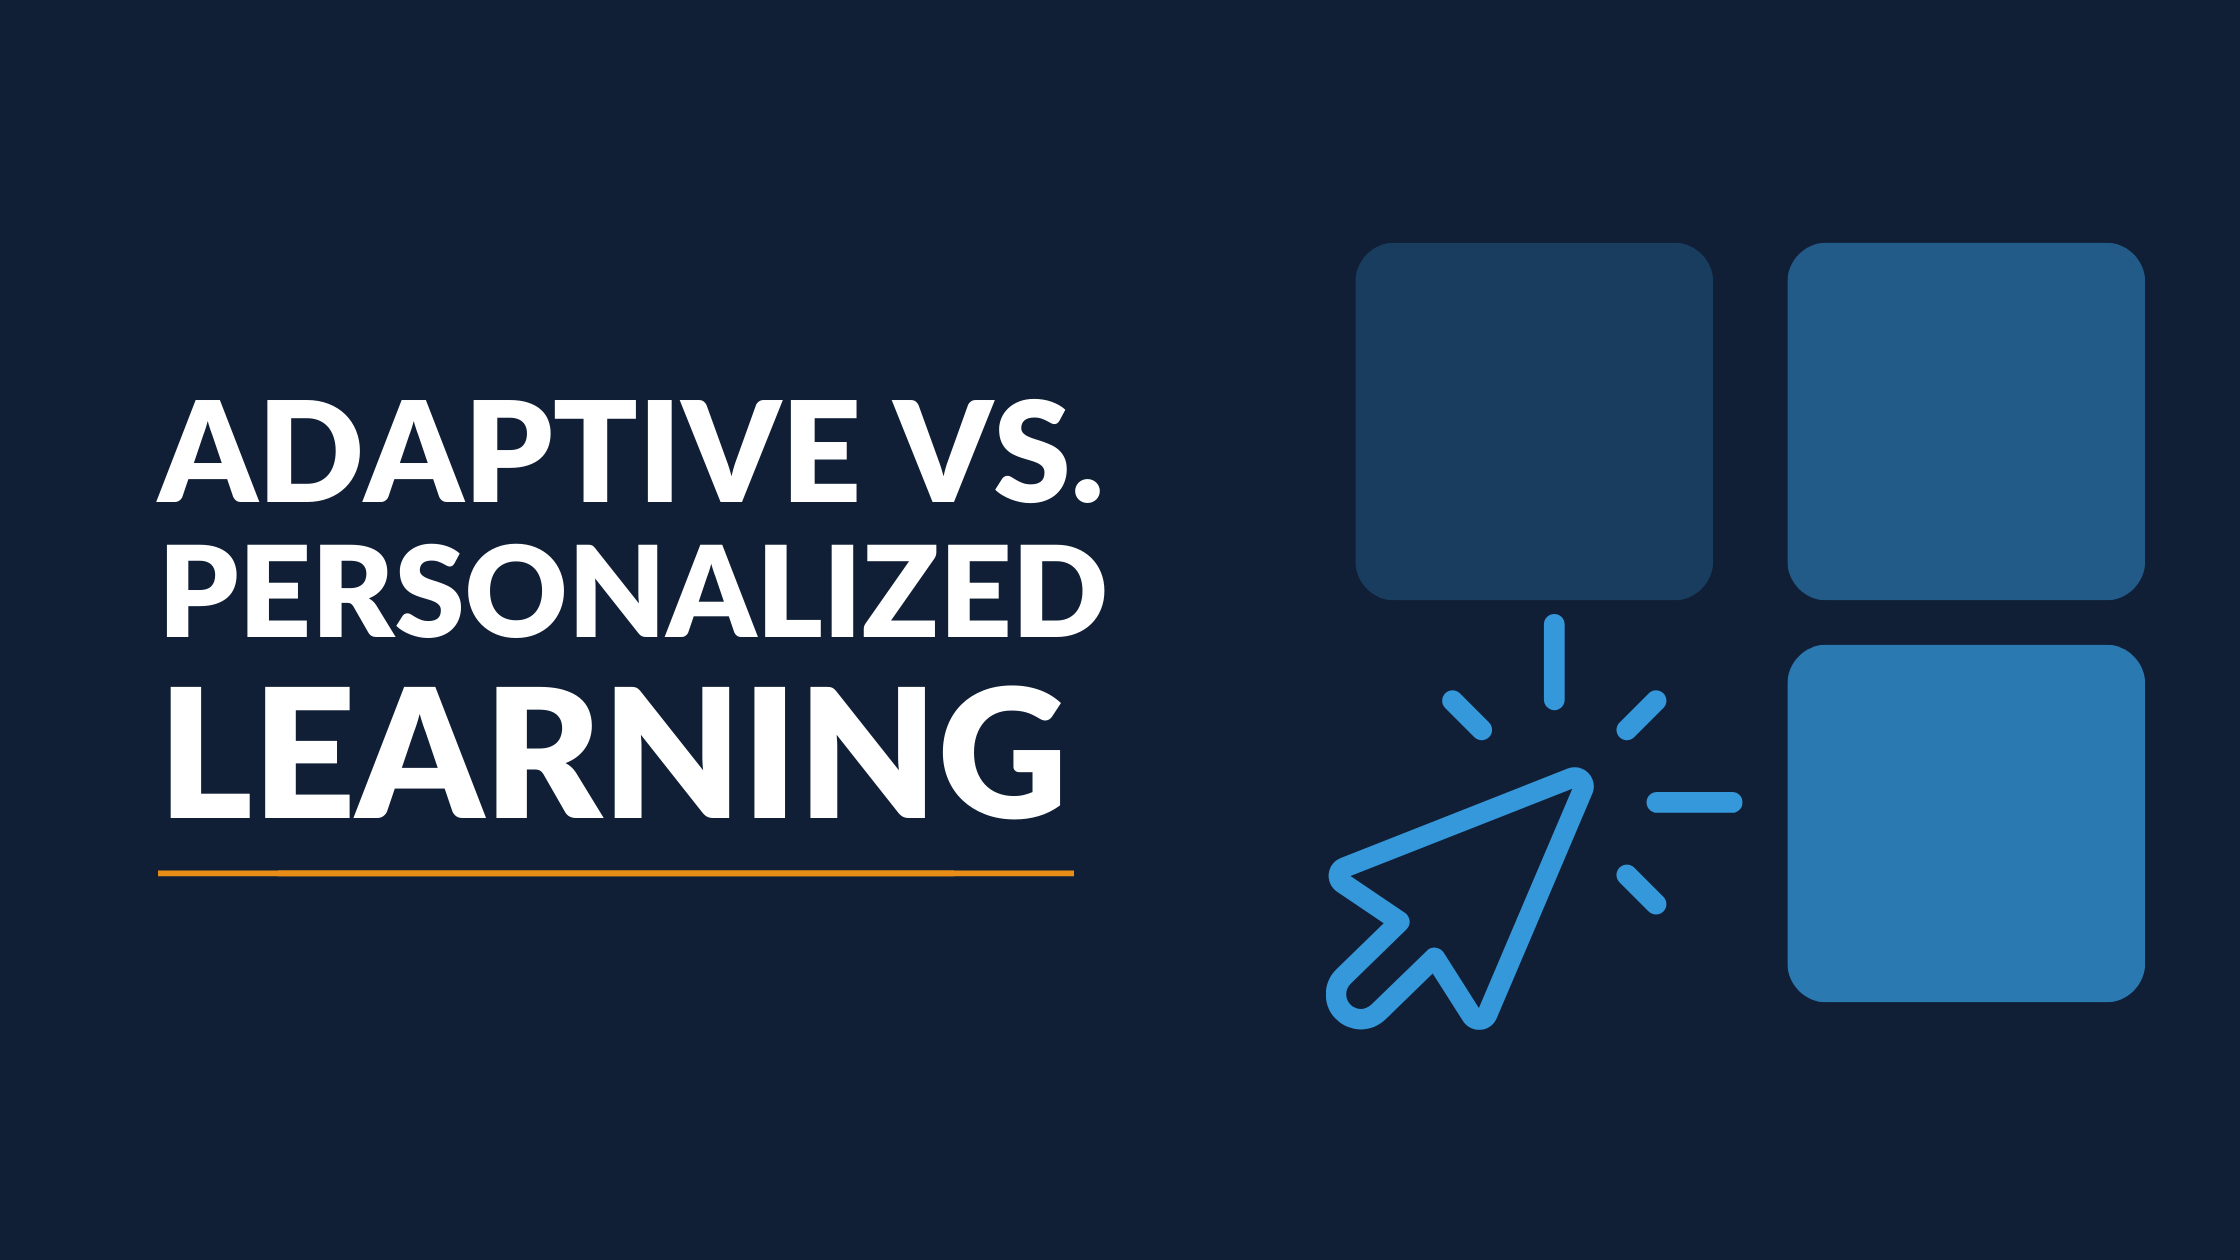 Adaptive Learning vs. Personalized Learning